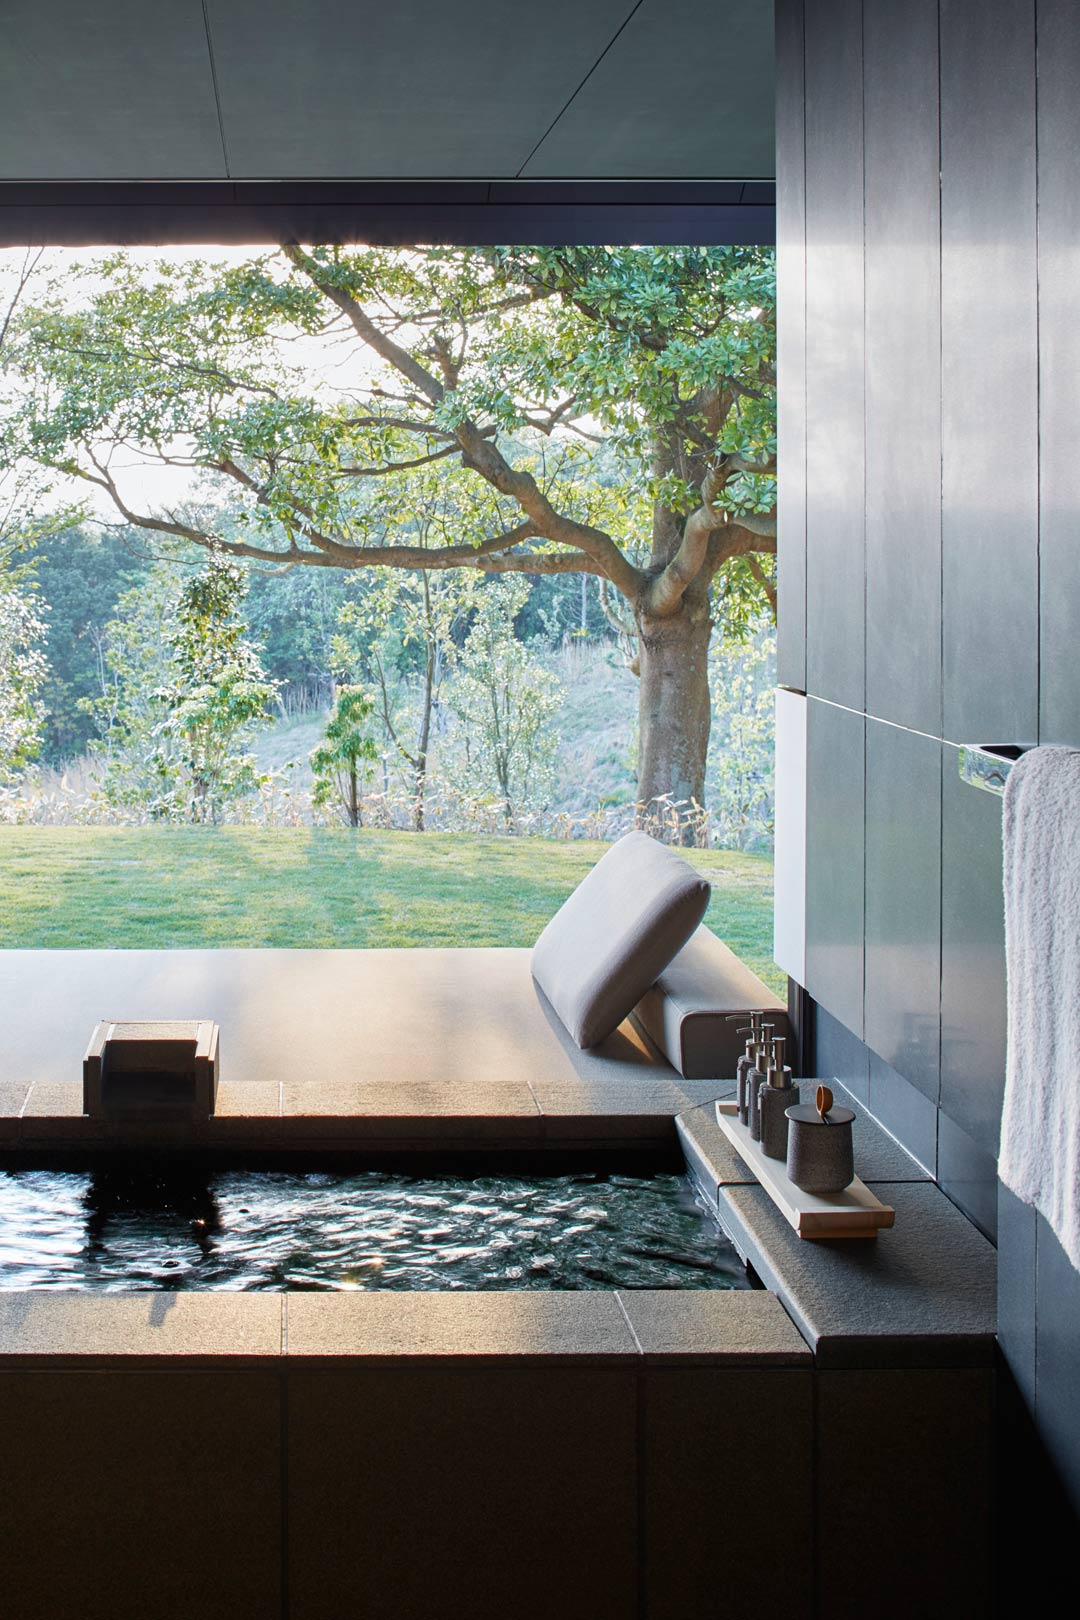 The two-bedroom Mori Villa beckons with private onsen facilities.